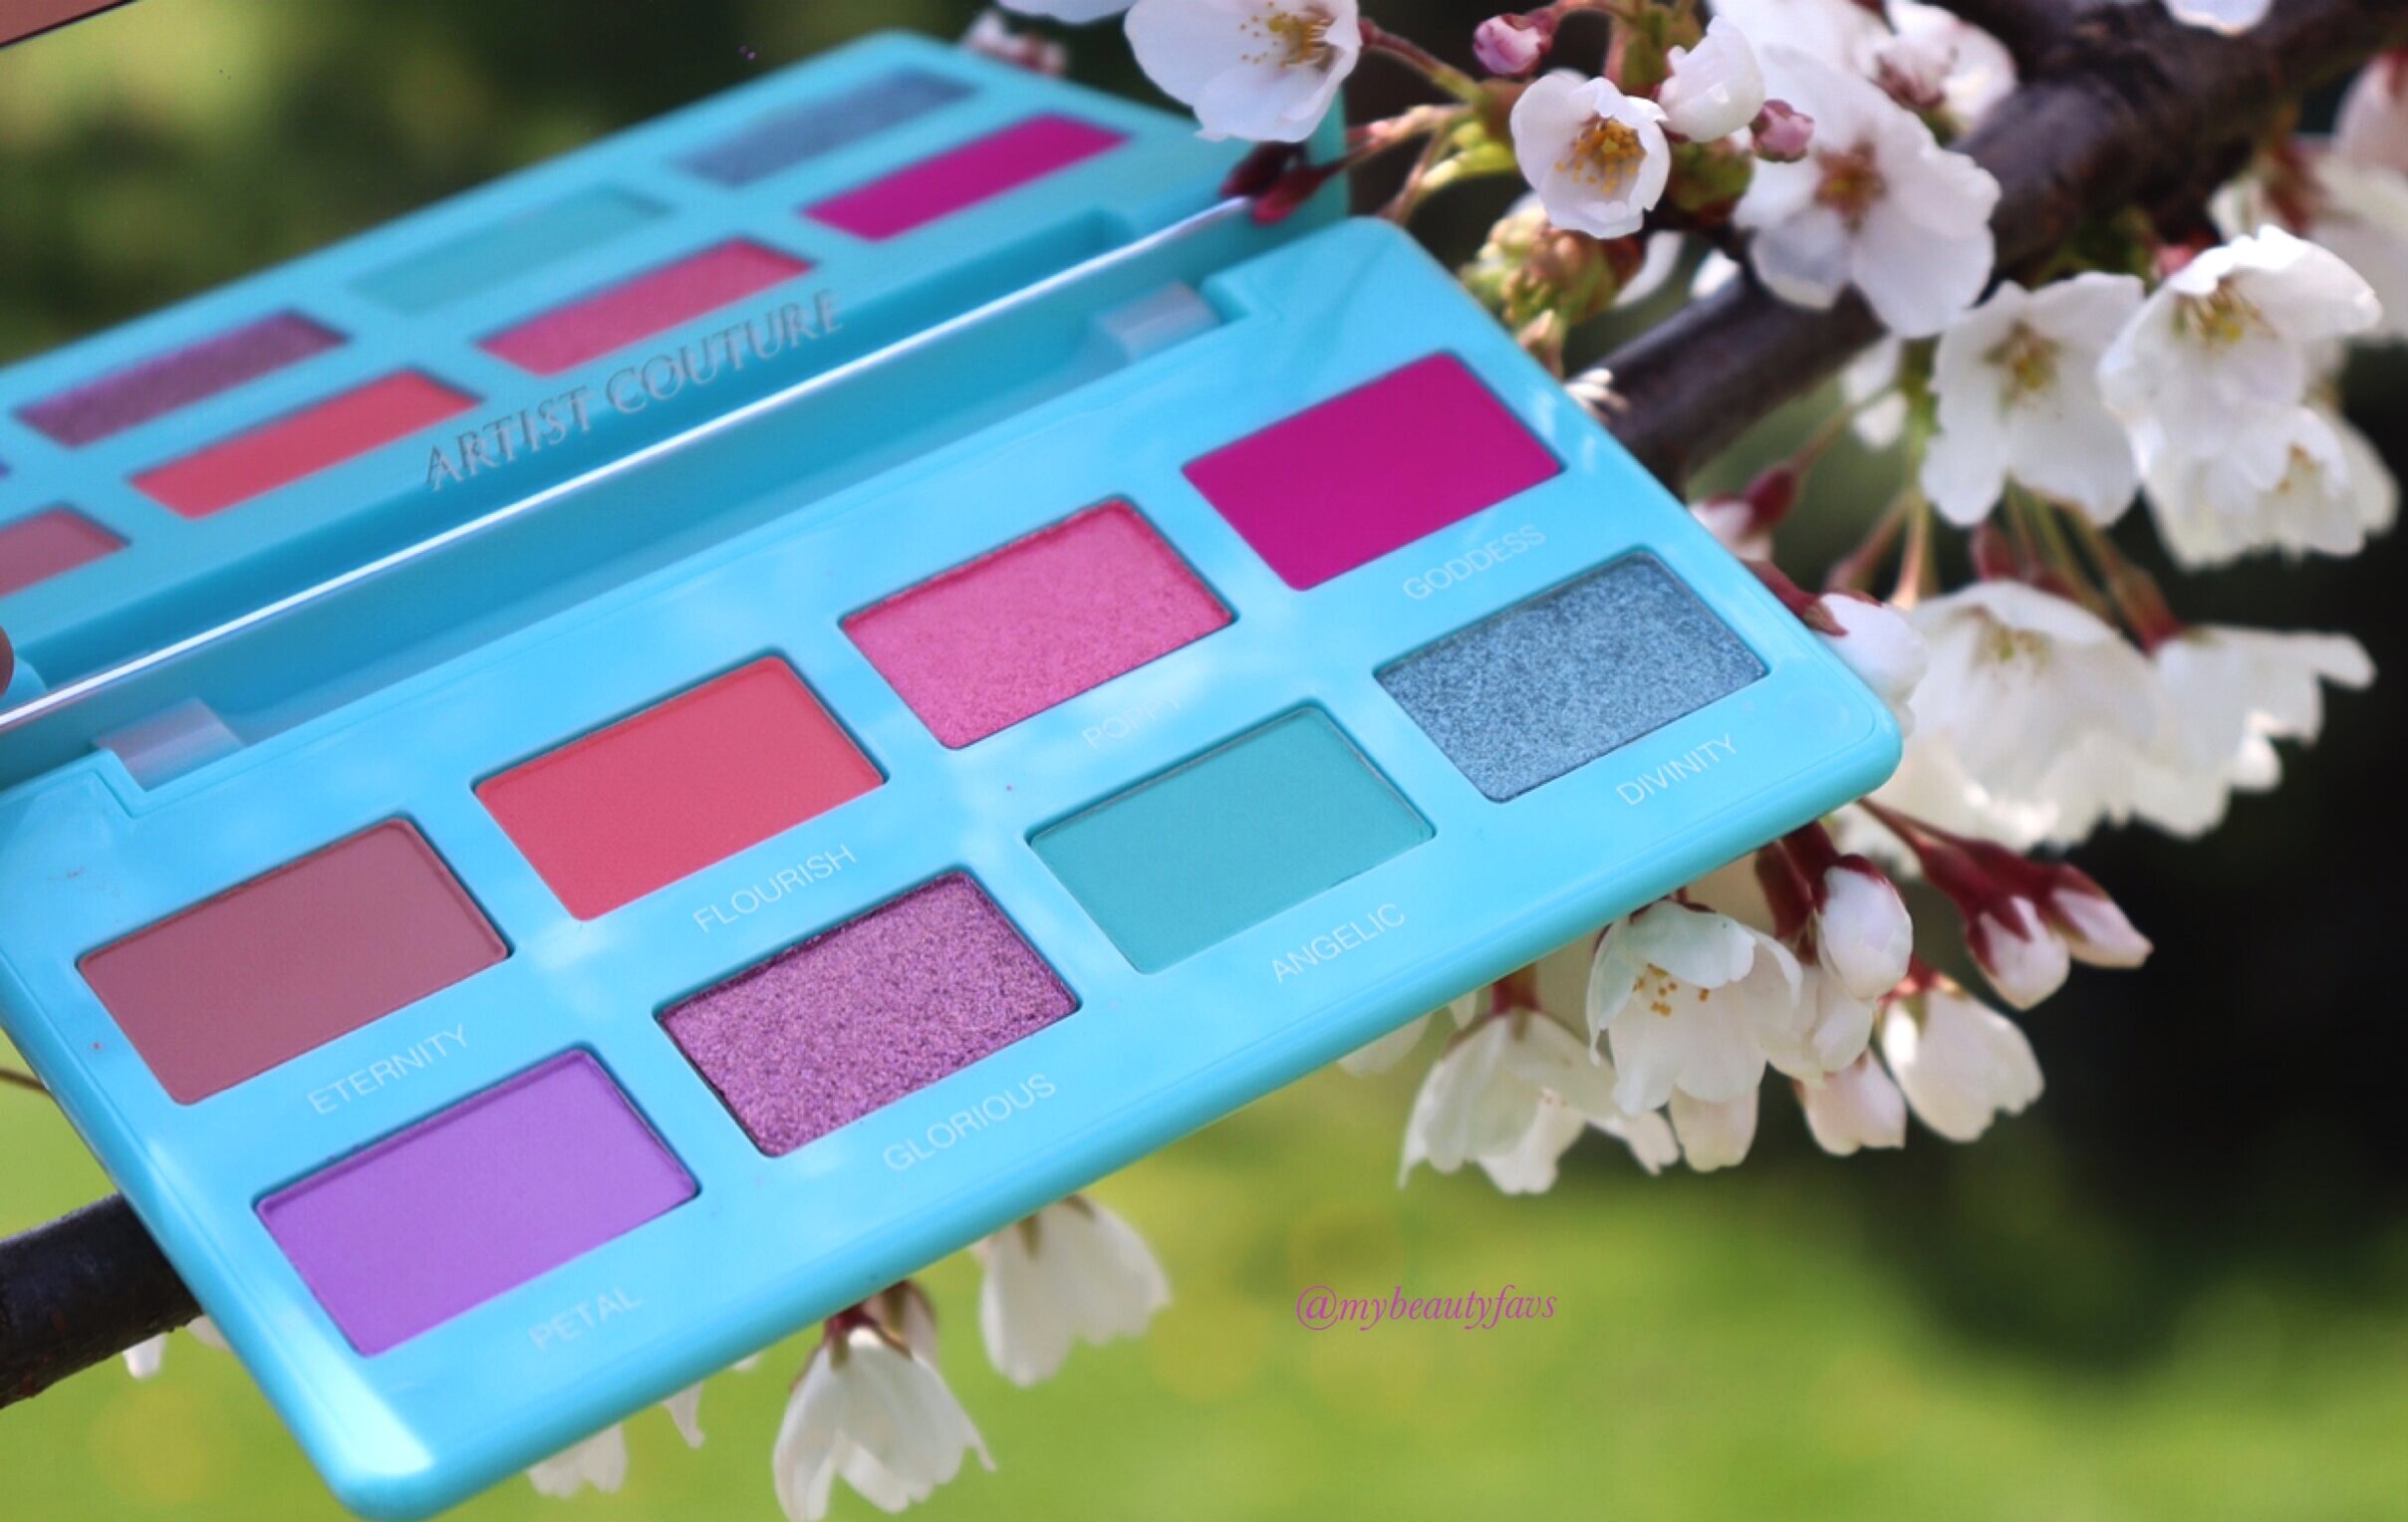 Artist Couture Ethereal Bloom Palette